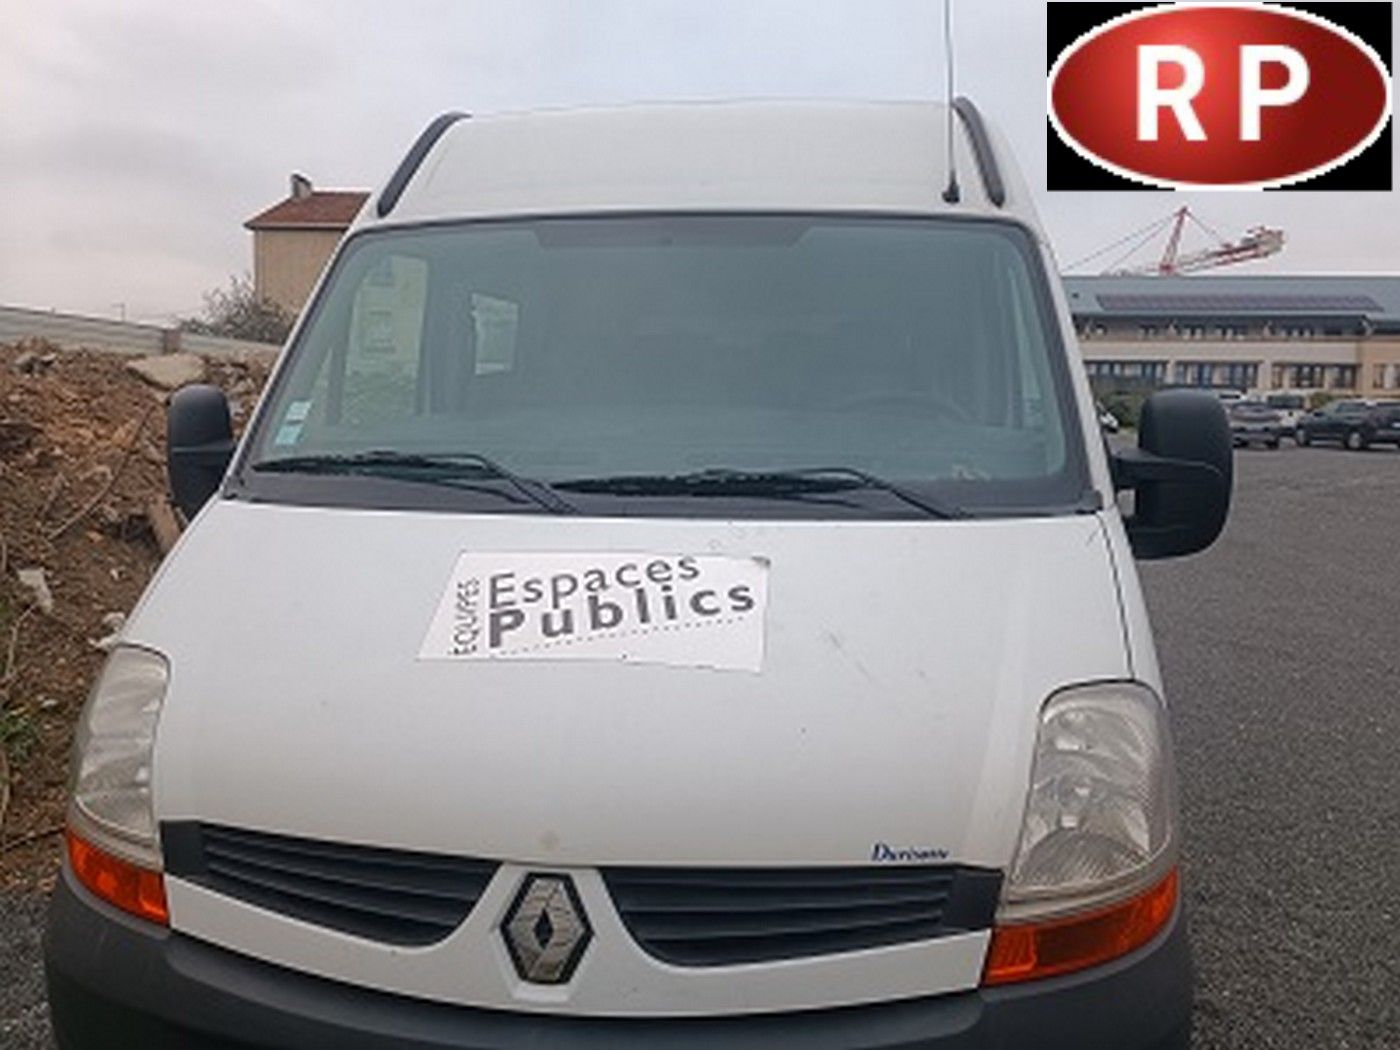 Null [RP] Utilitaire RENAULT MASTER II fourgon 2.5 dCi L2H2 100, Gazole, récepti&hellip;